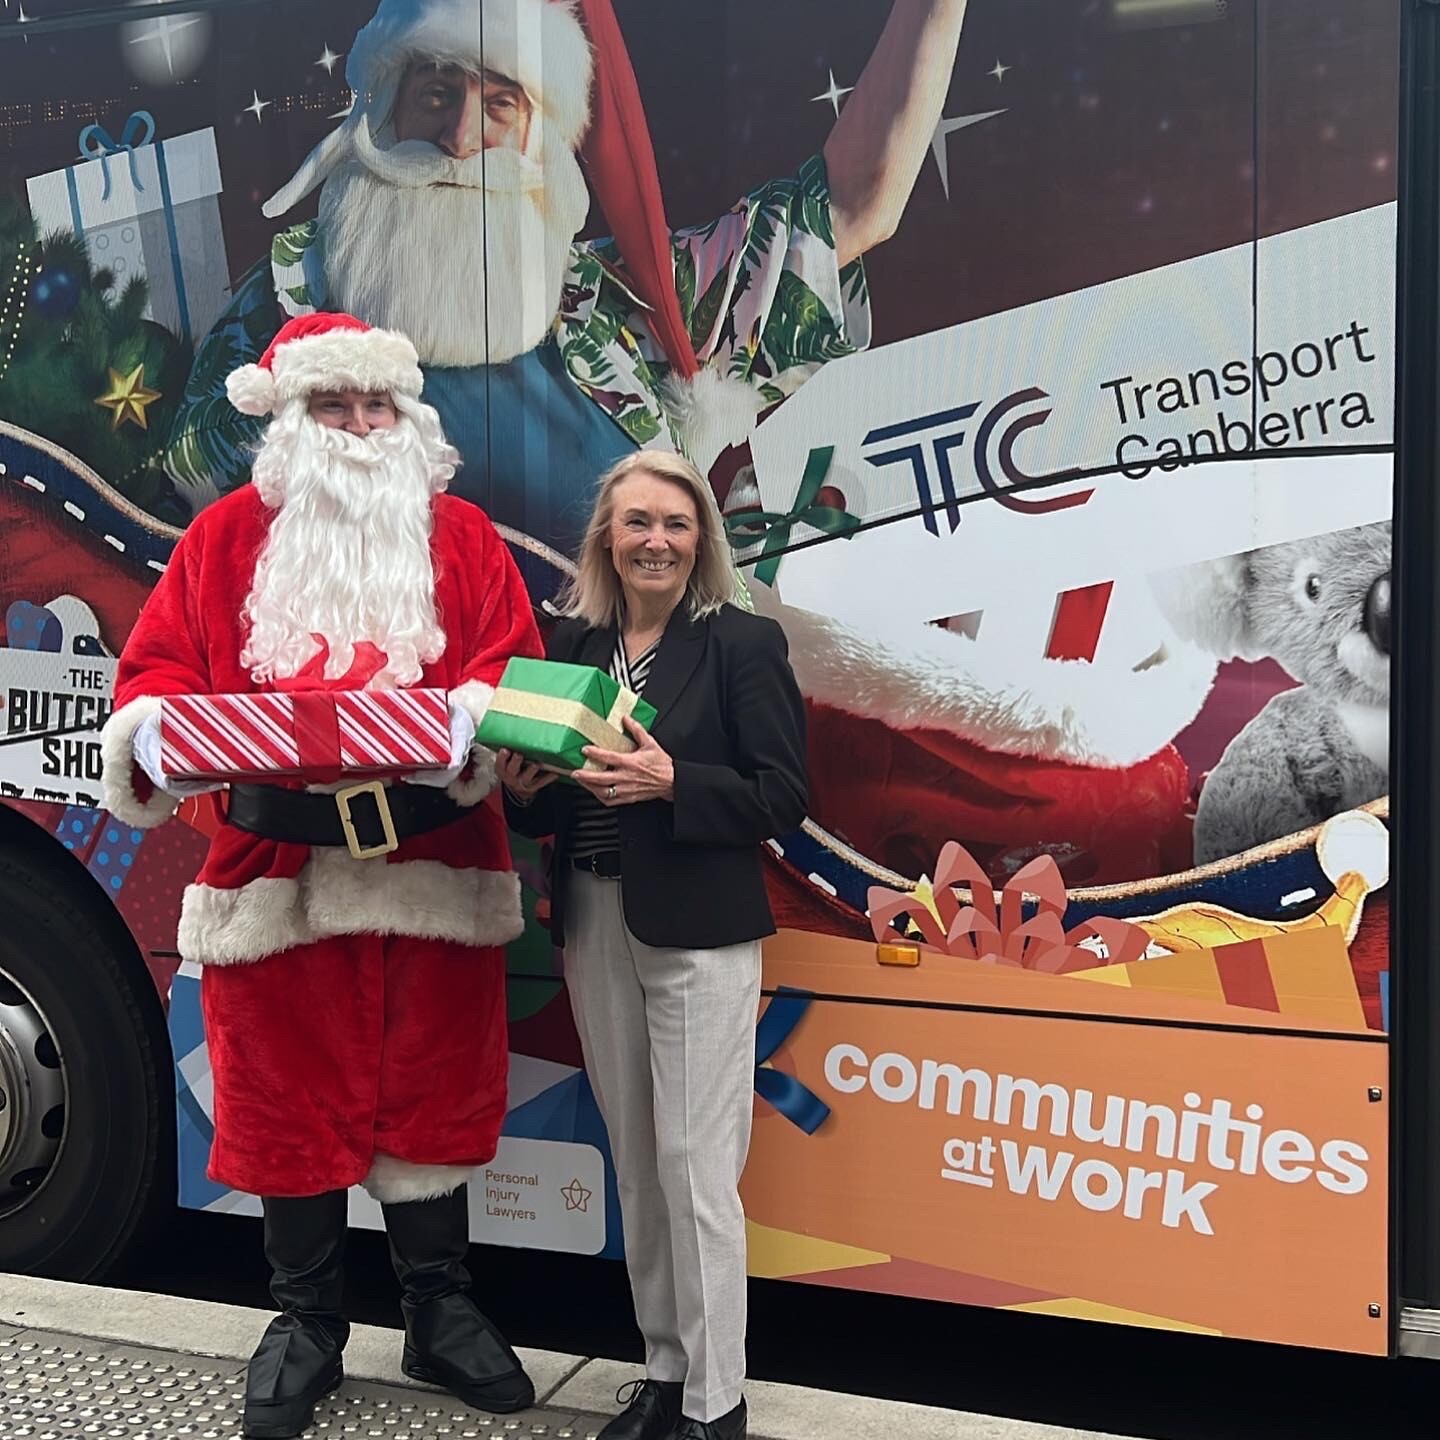 Mix106.3 Canberra and Transport Canberra Santa with Communities at Work CEO Lee Maiden for Christmas appeal Pack the Bus 2021